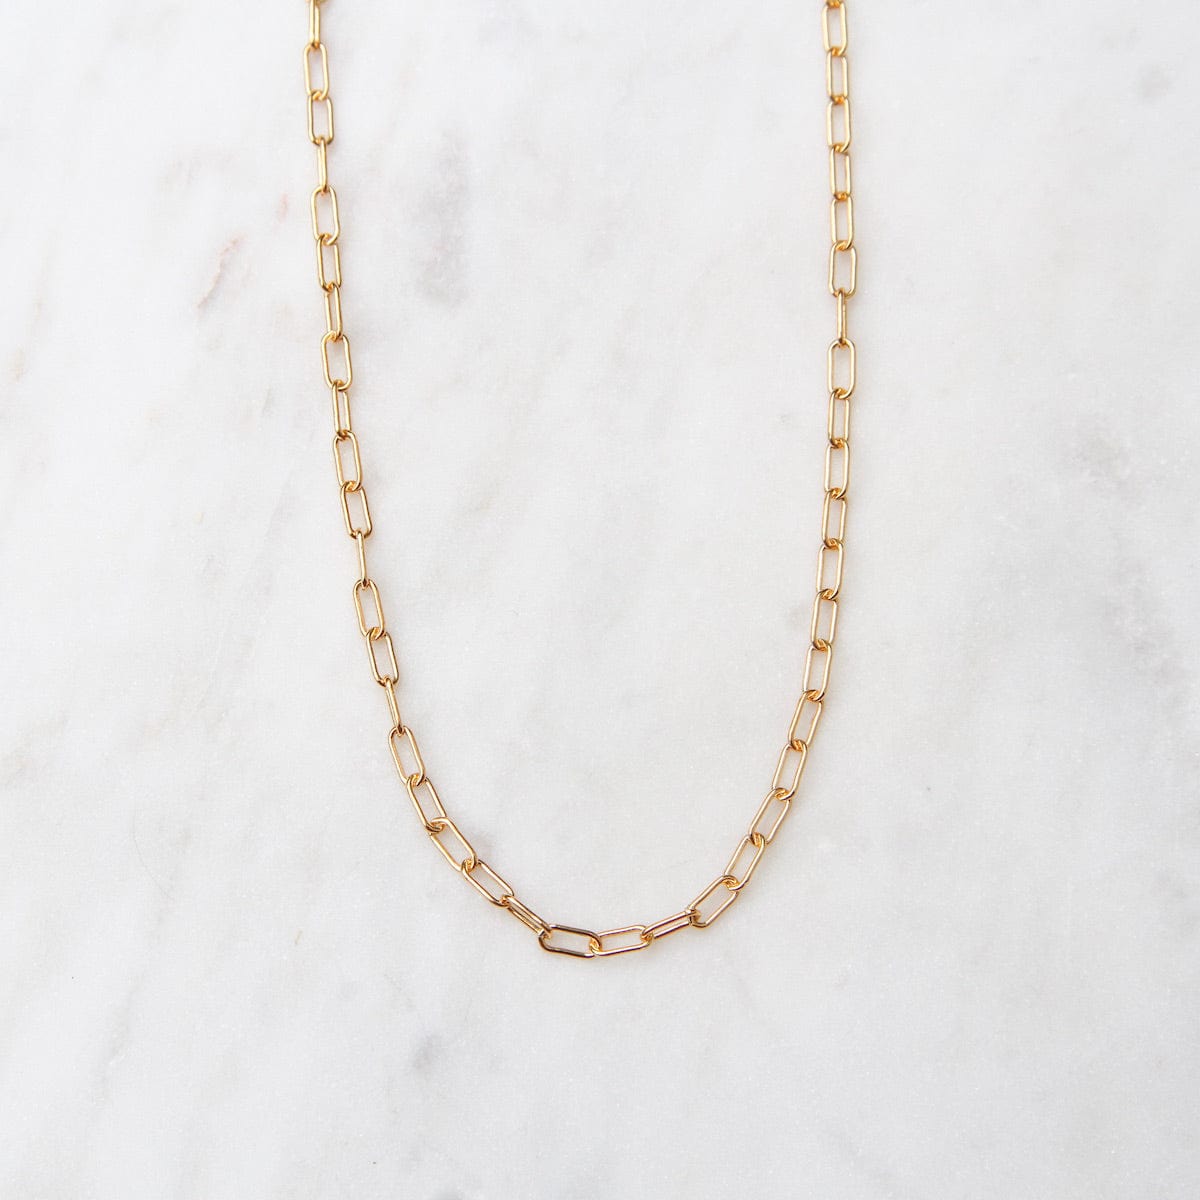 NKL-GF 20" Gold Filled Round Drawn Cable Chain